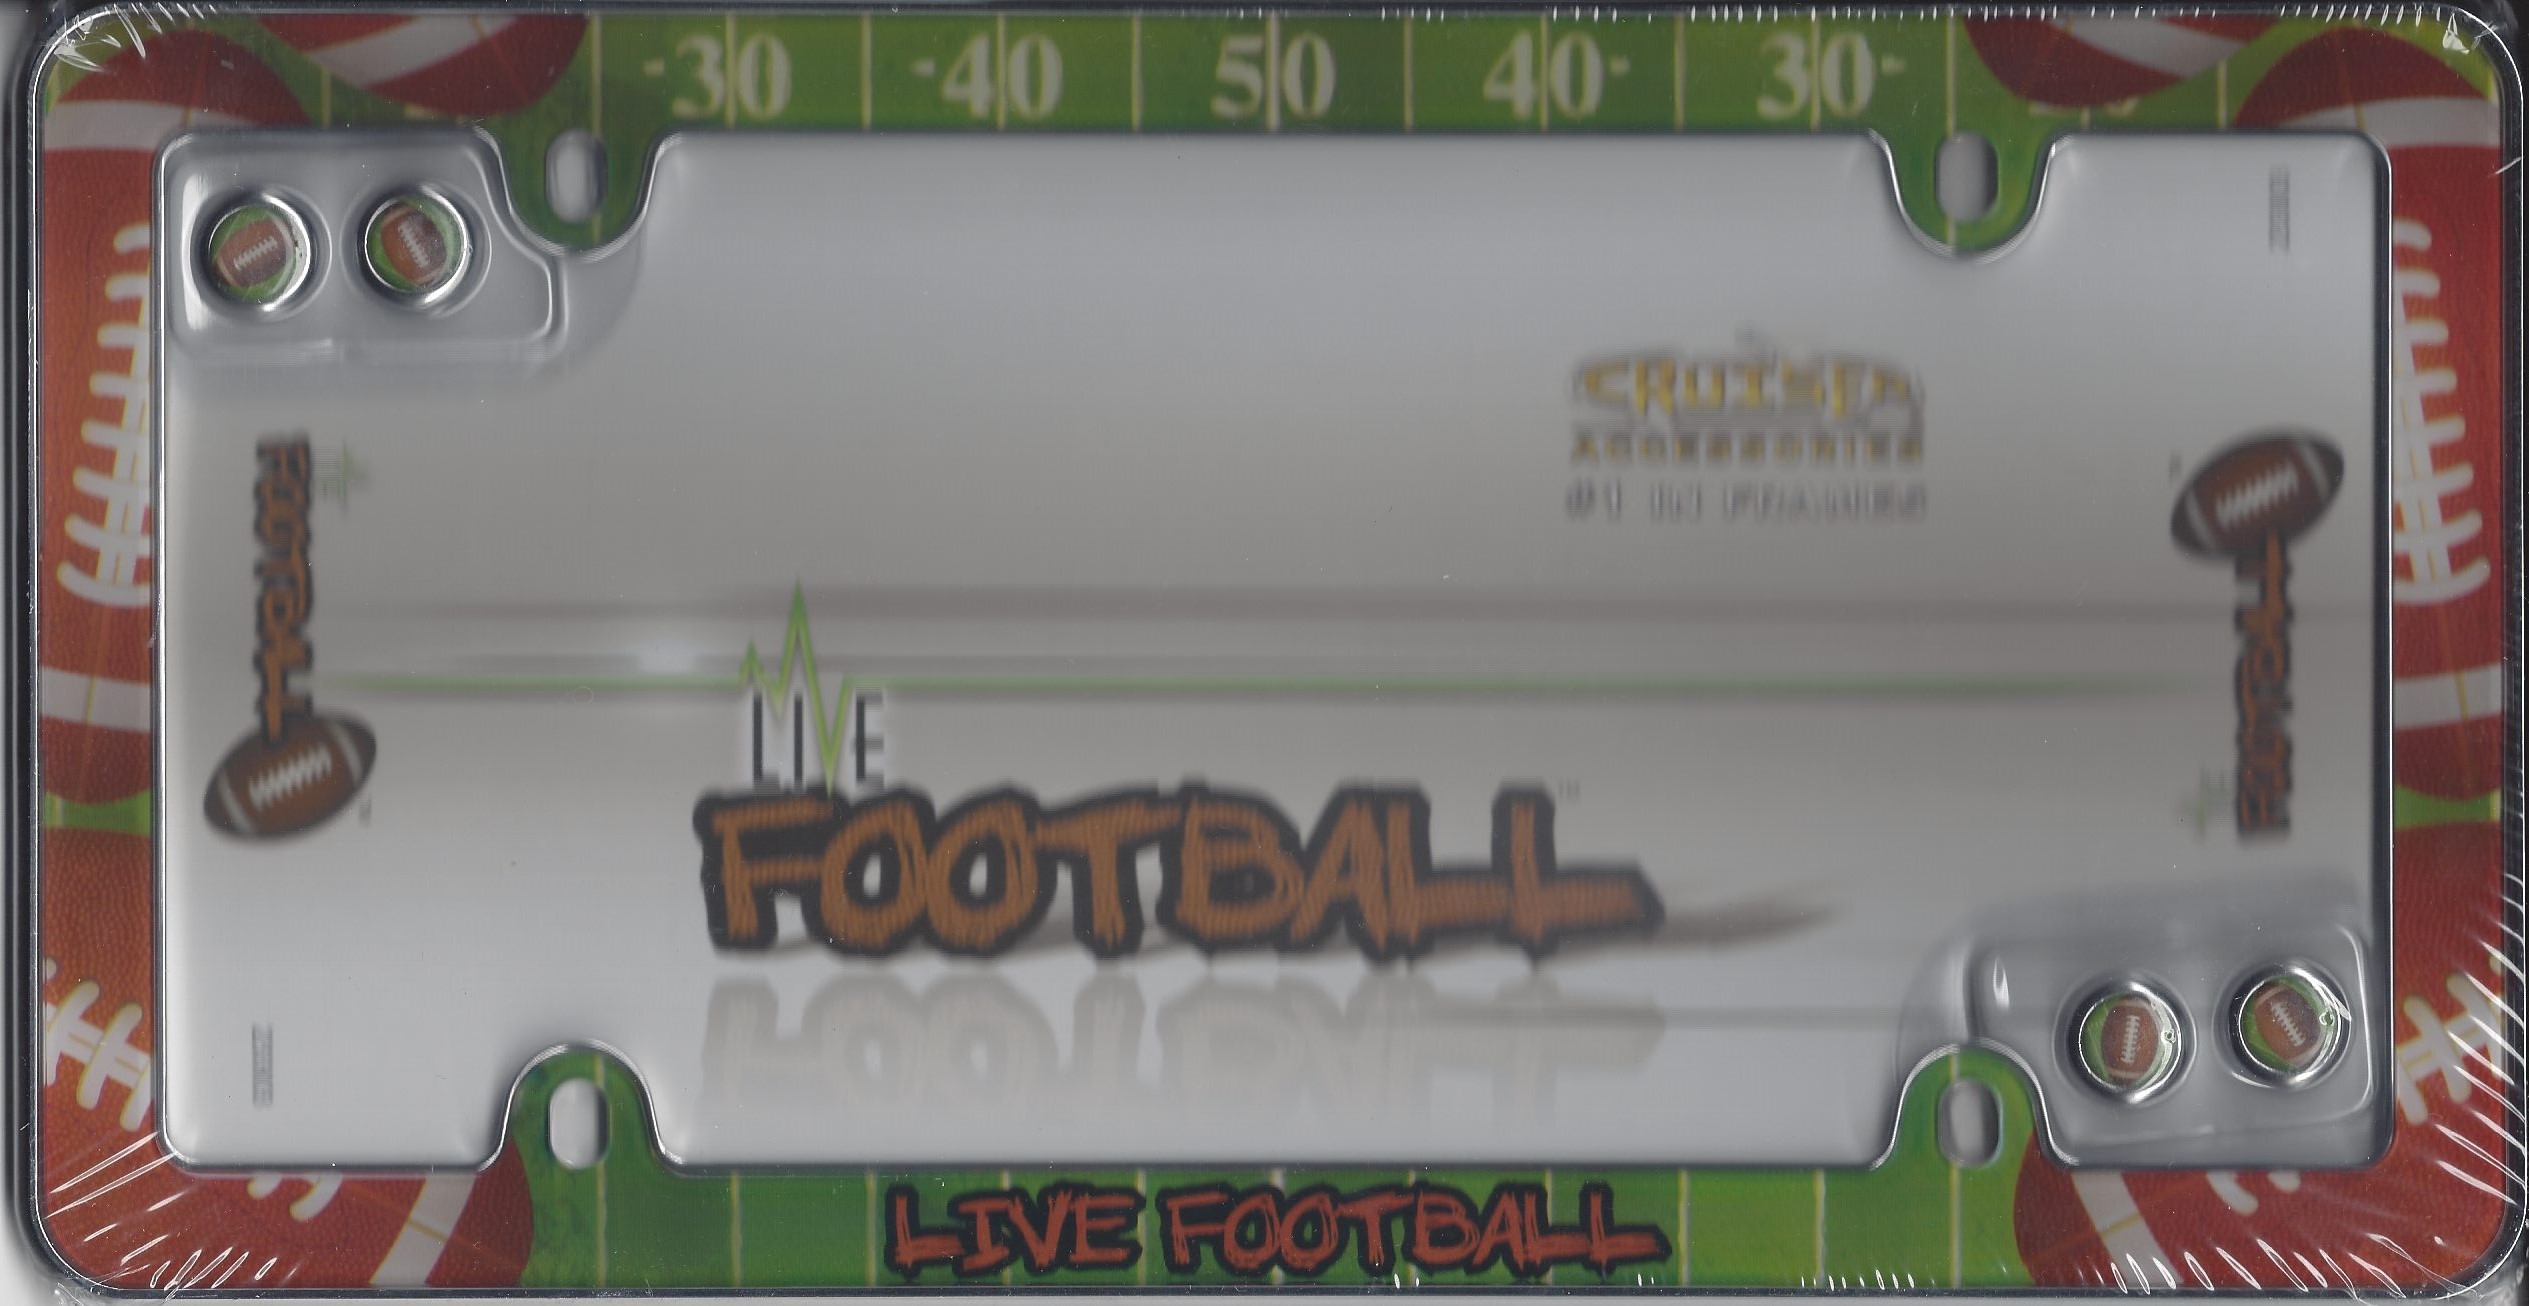 FOOTBALL Plastic License Plate Frame  Free Screw Caps with this Frame